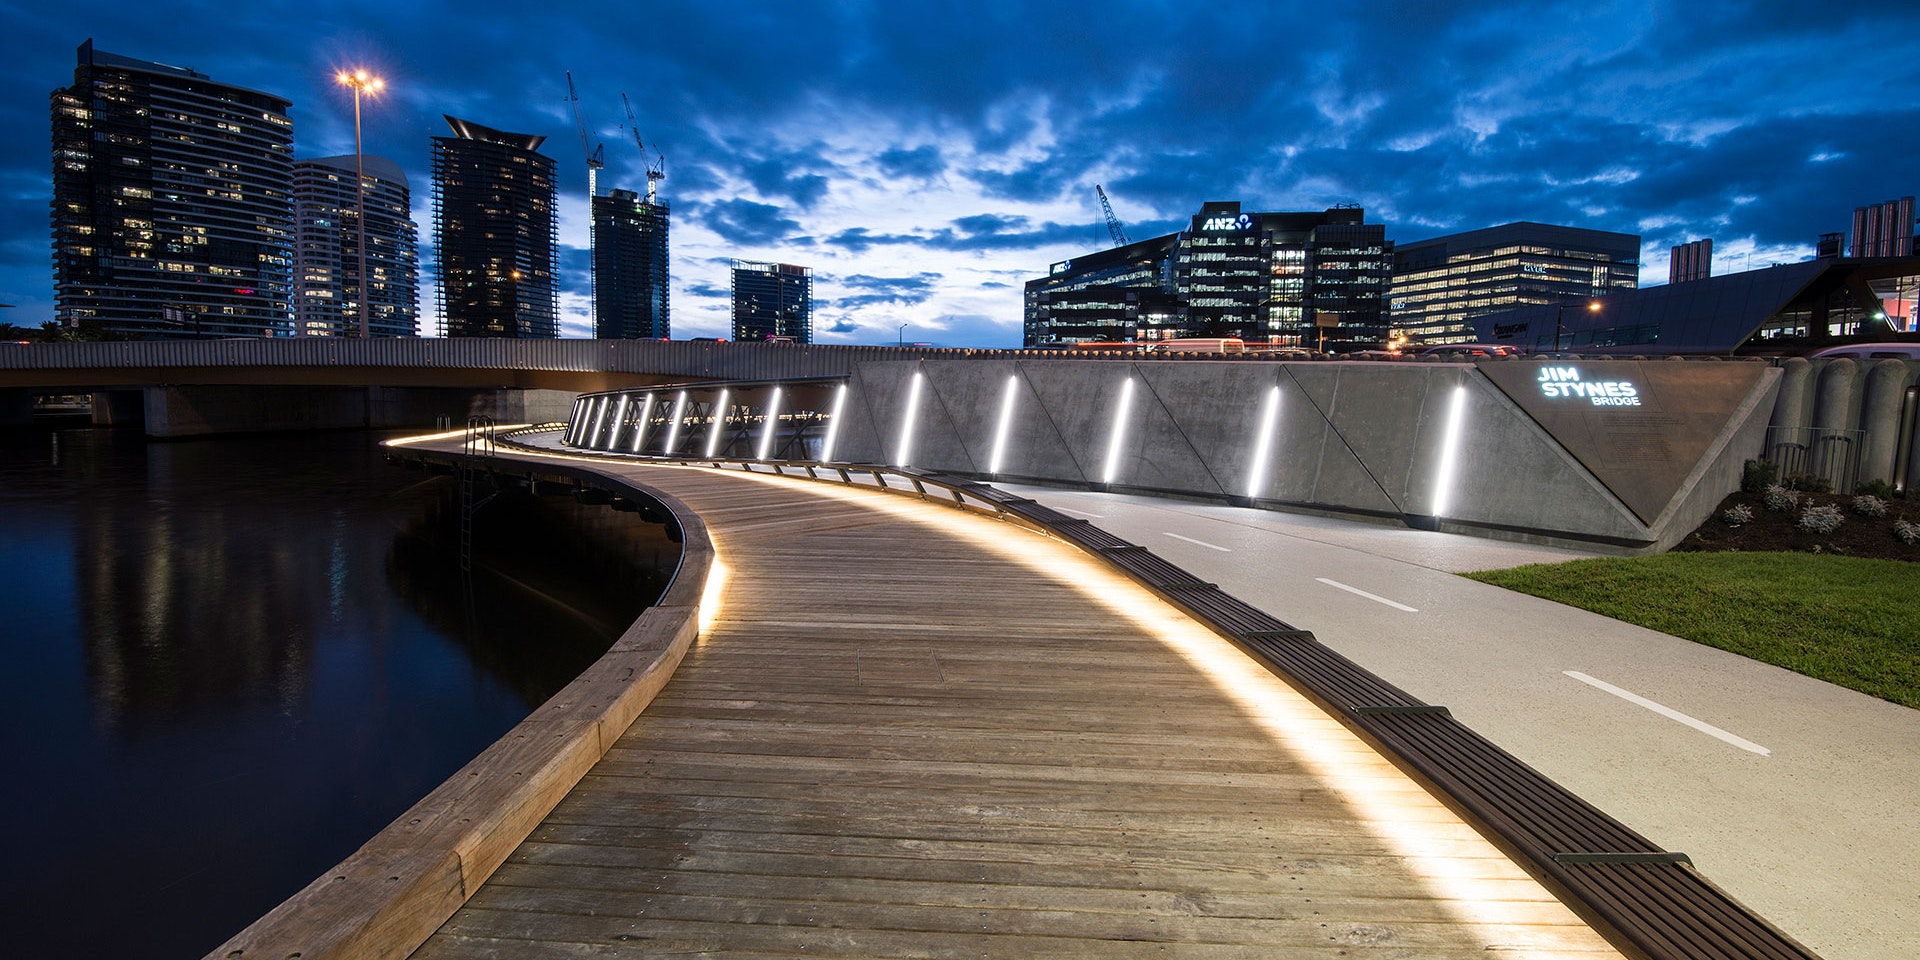 Electro IP robust outdoor LED luminaire in application, installed on the Jim Stynes Bridge in Melbourne.